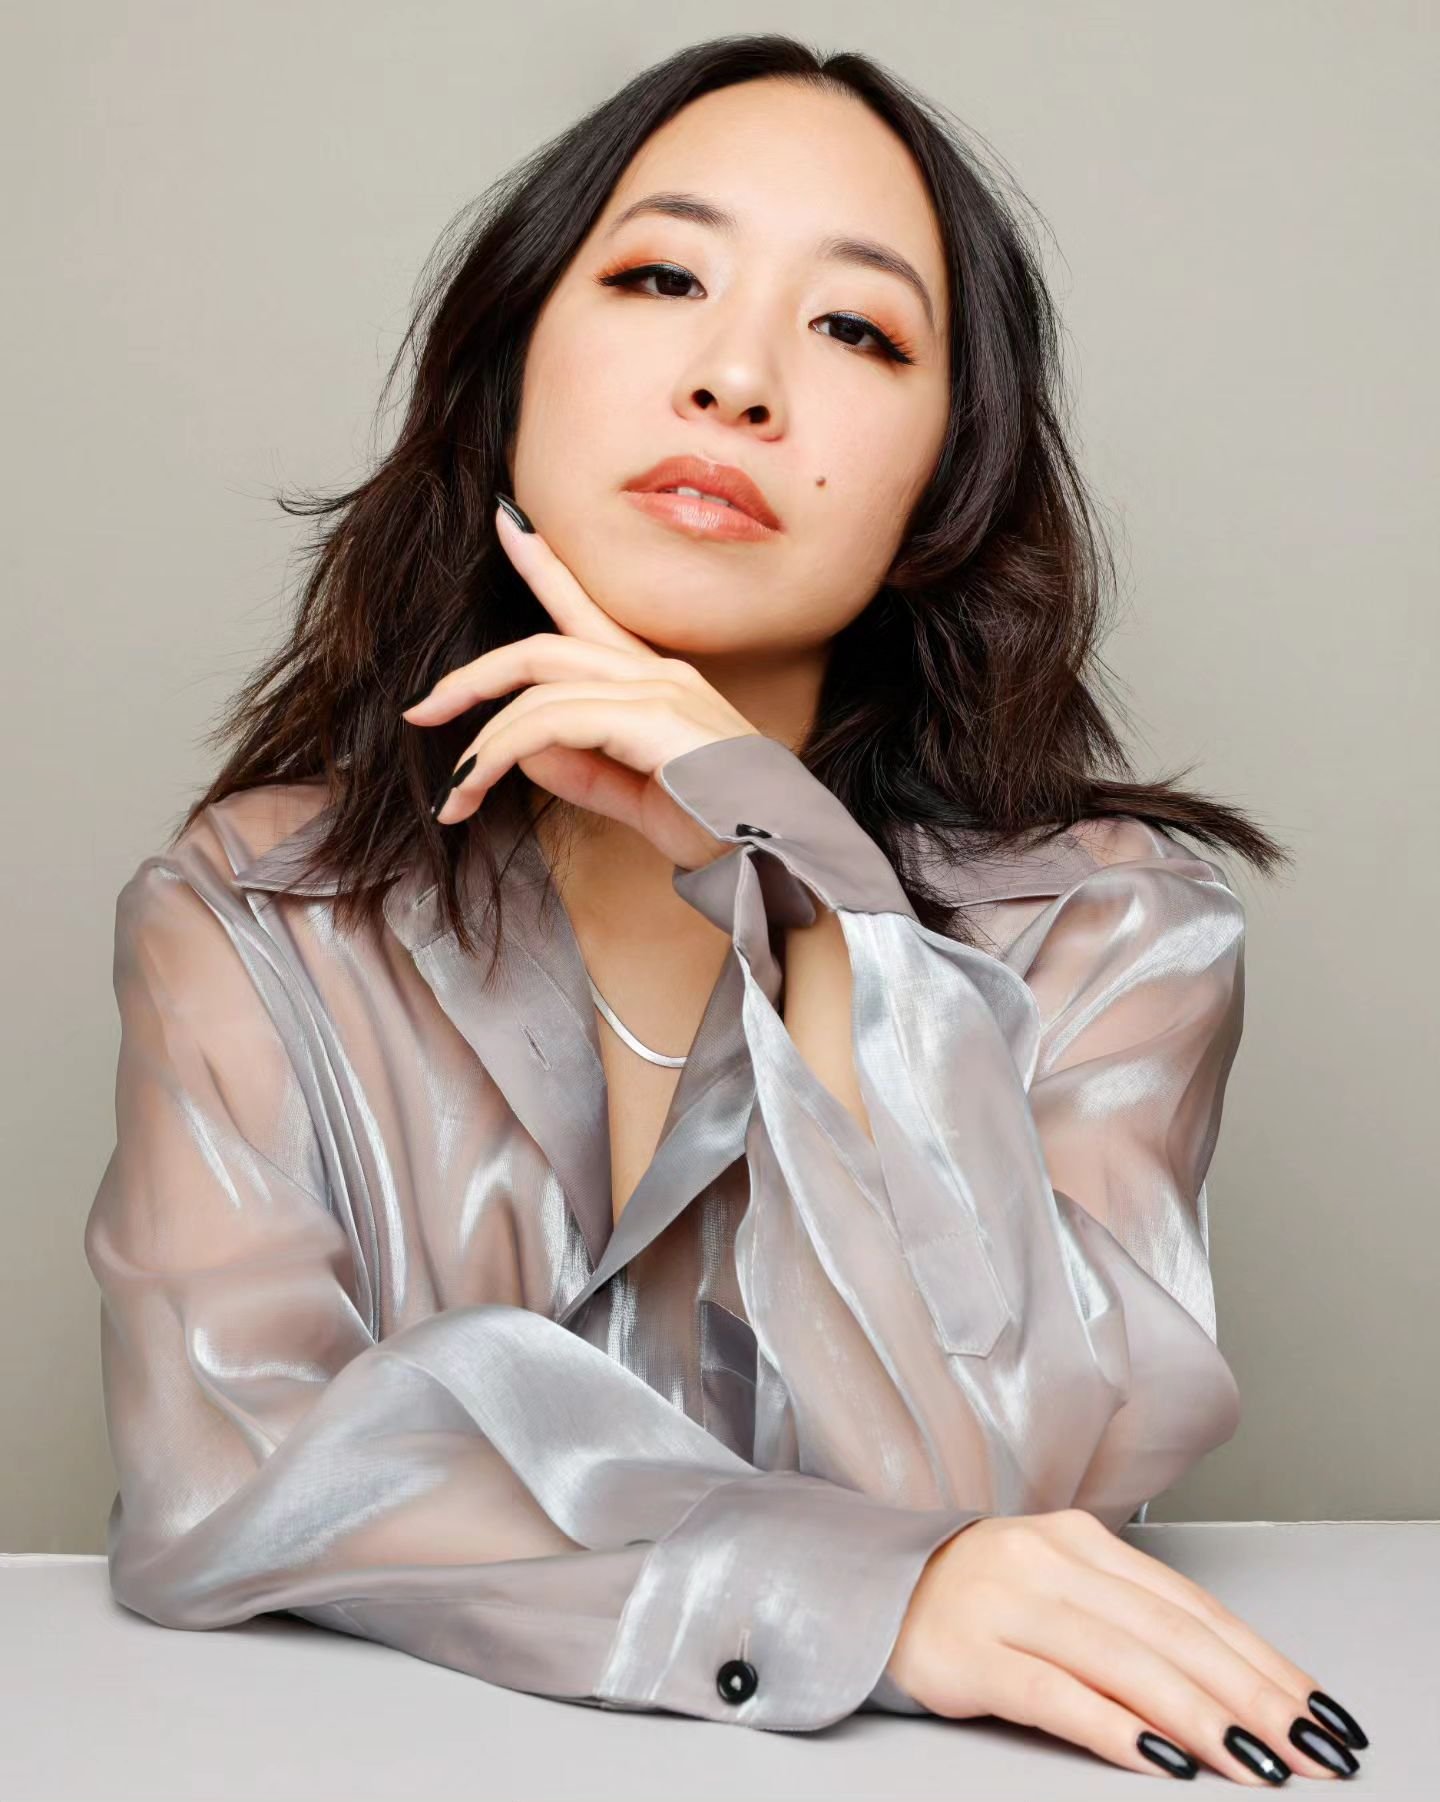 Y'all have been giving me thee best descriptions for these headshots 🥵 Vanity Fair Editorial, Memoir Book Cover, SNL Diva, Comedic Genius, Devil Wears Prada, Expensive Aesthete, Mob Boss, Ruthless Prosecutor, Fortune 500 CEO, Sandra Oh in Grey's Ana